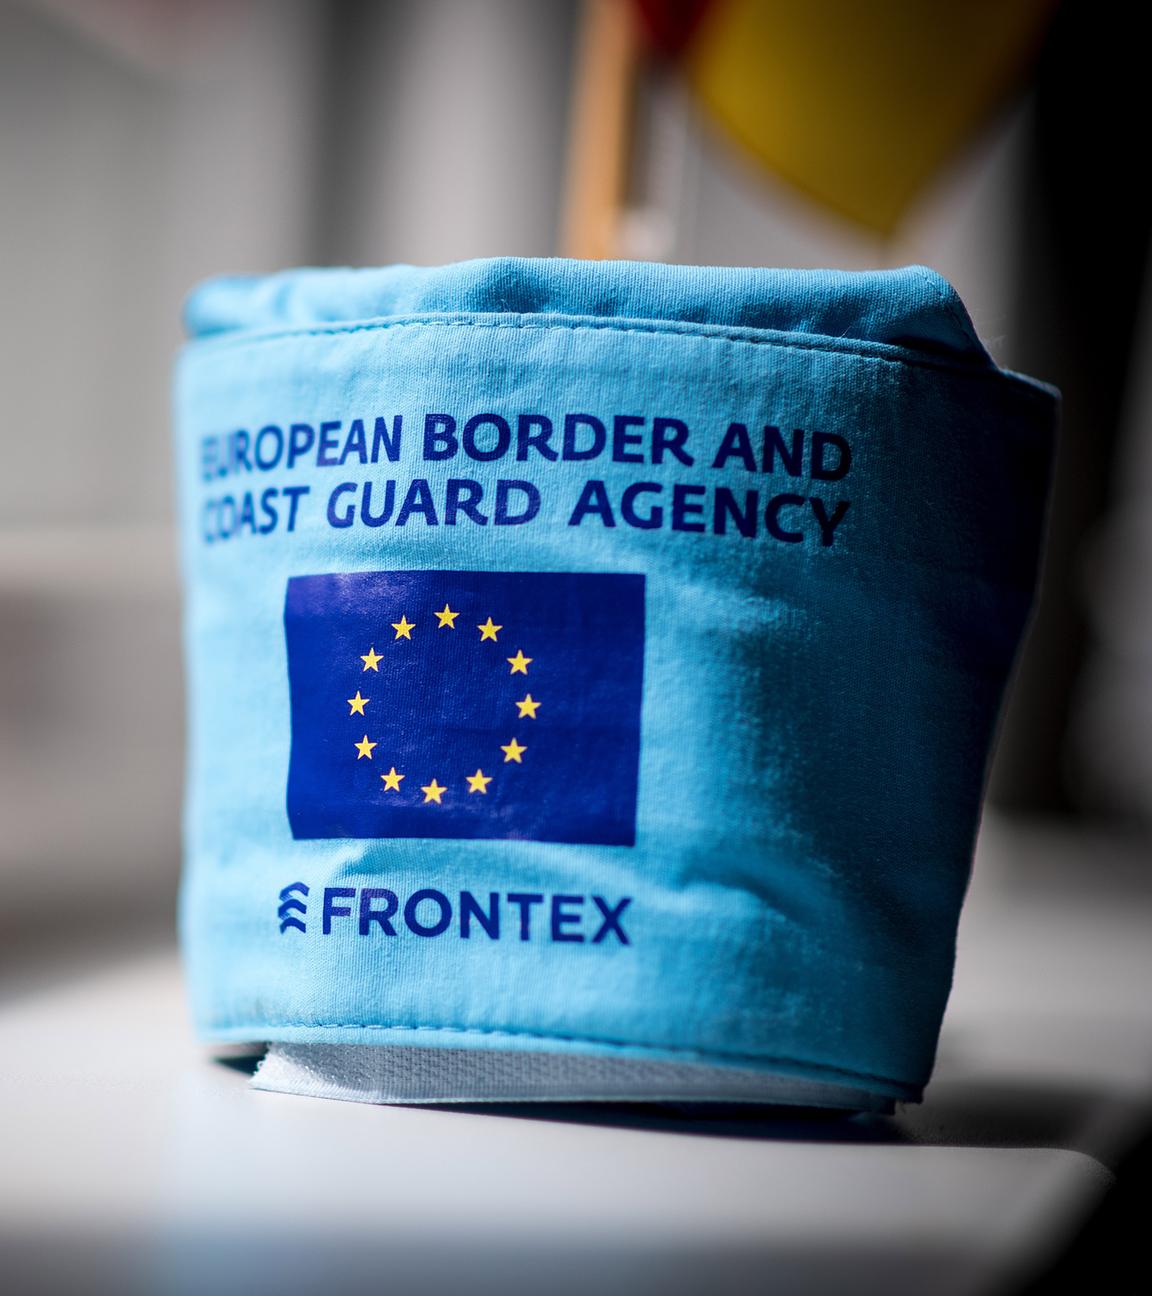 Typical: Frontex